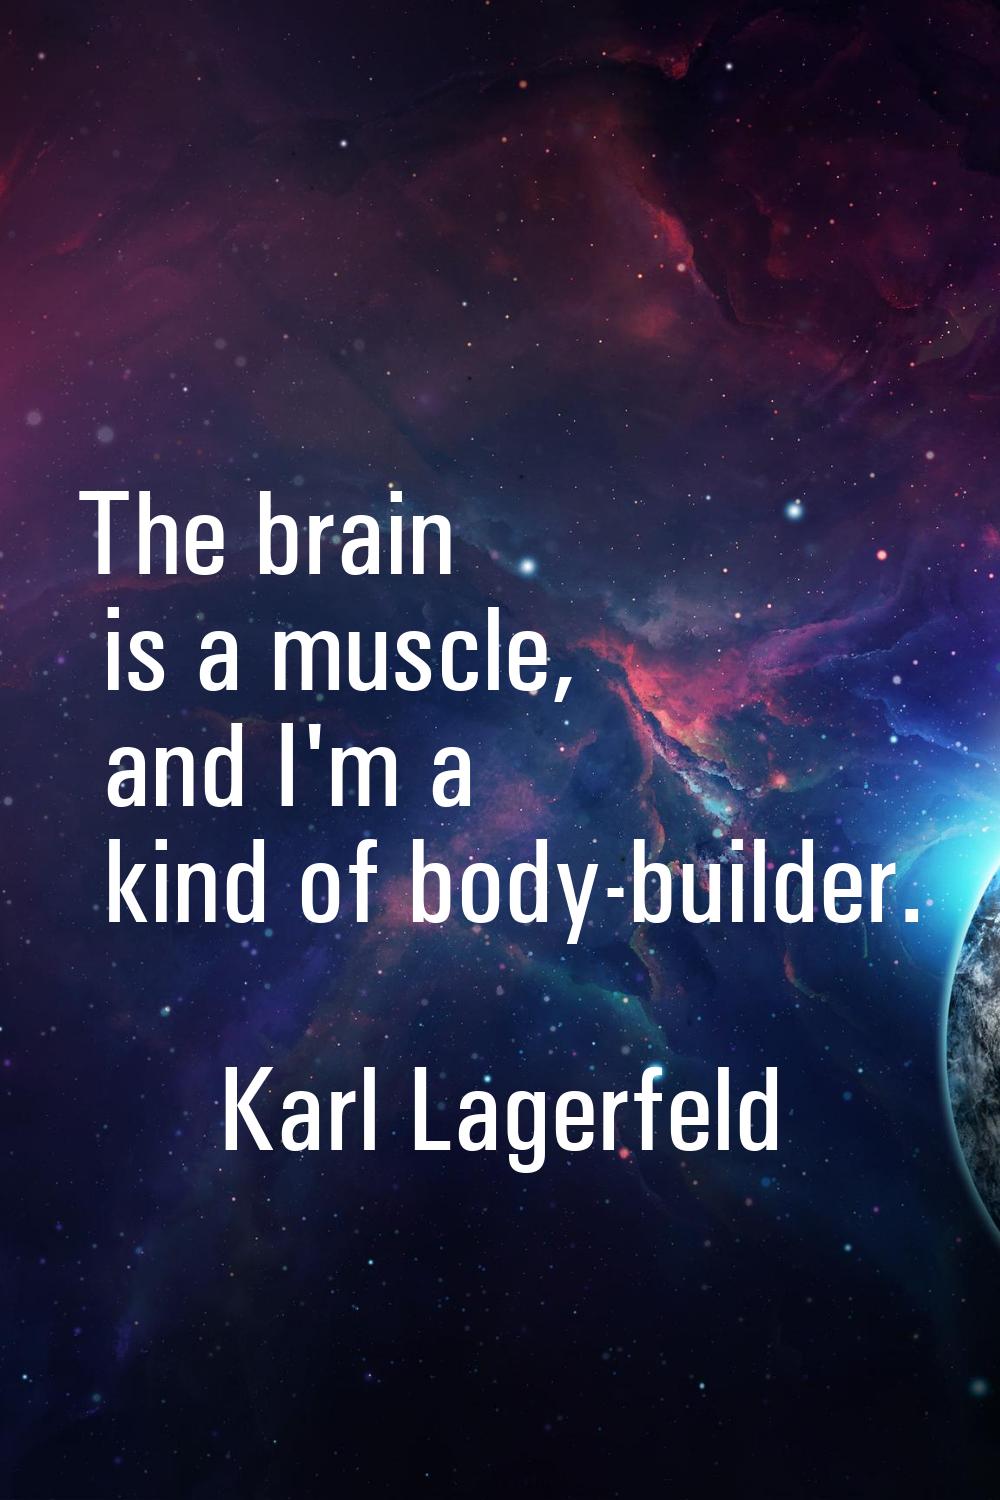 The brain is a muscle, and I'm a kind of body-builder.